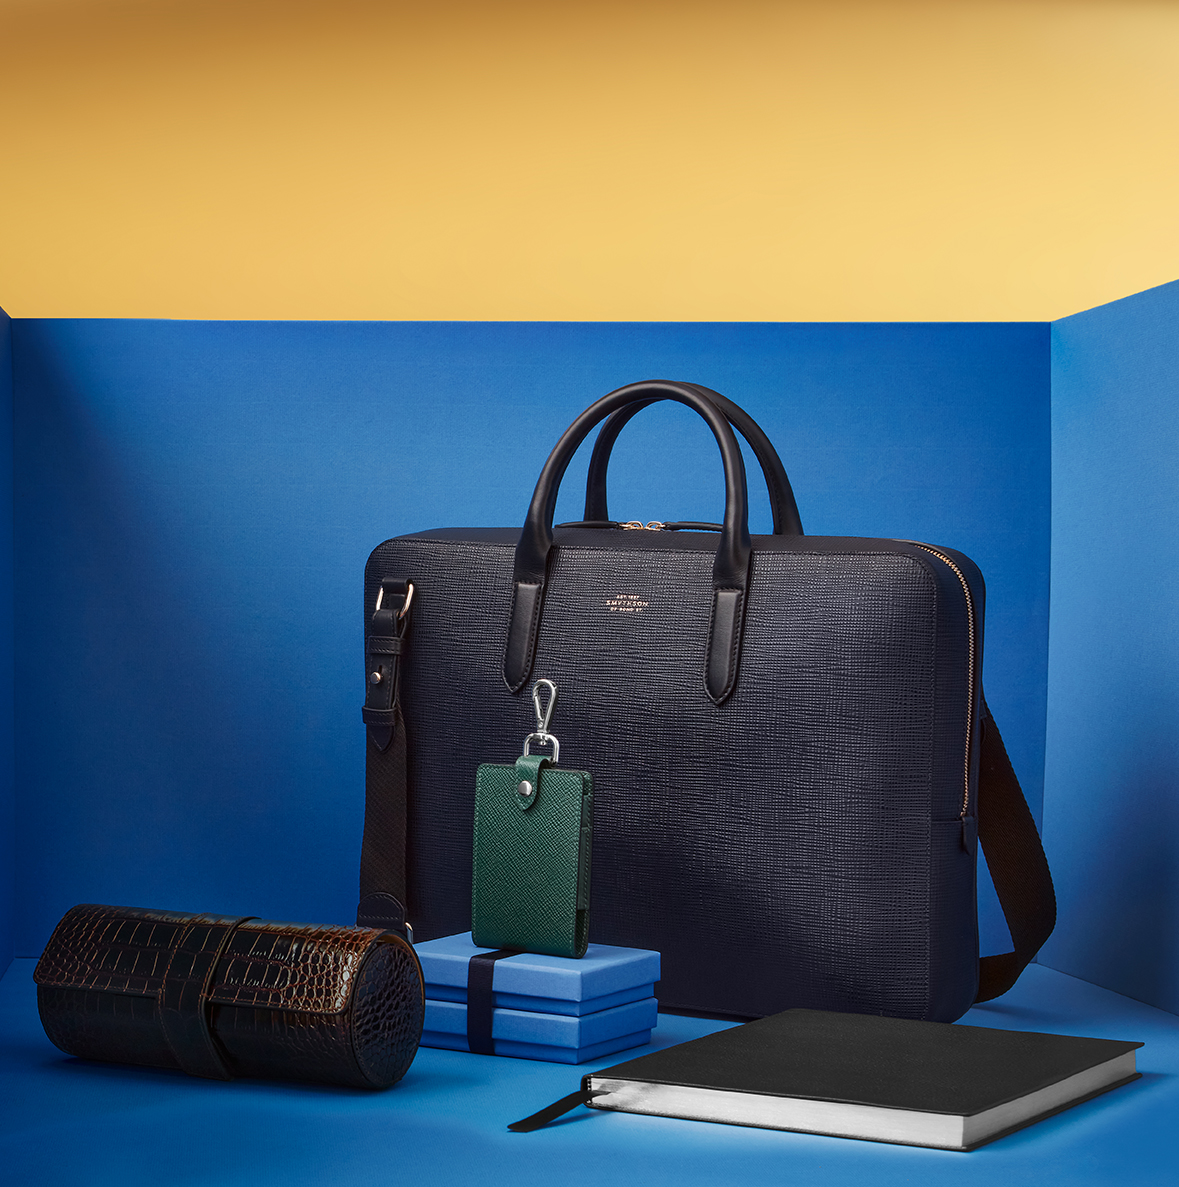 We are thrilled to begin carrying Smythson of Bond Street leather